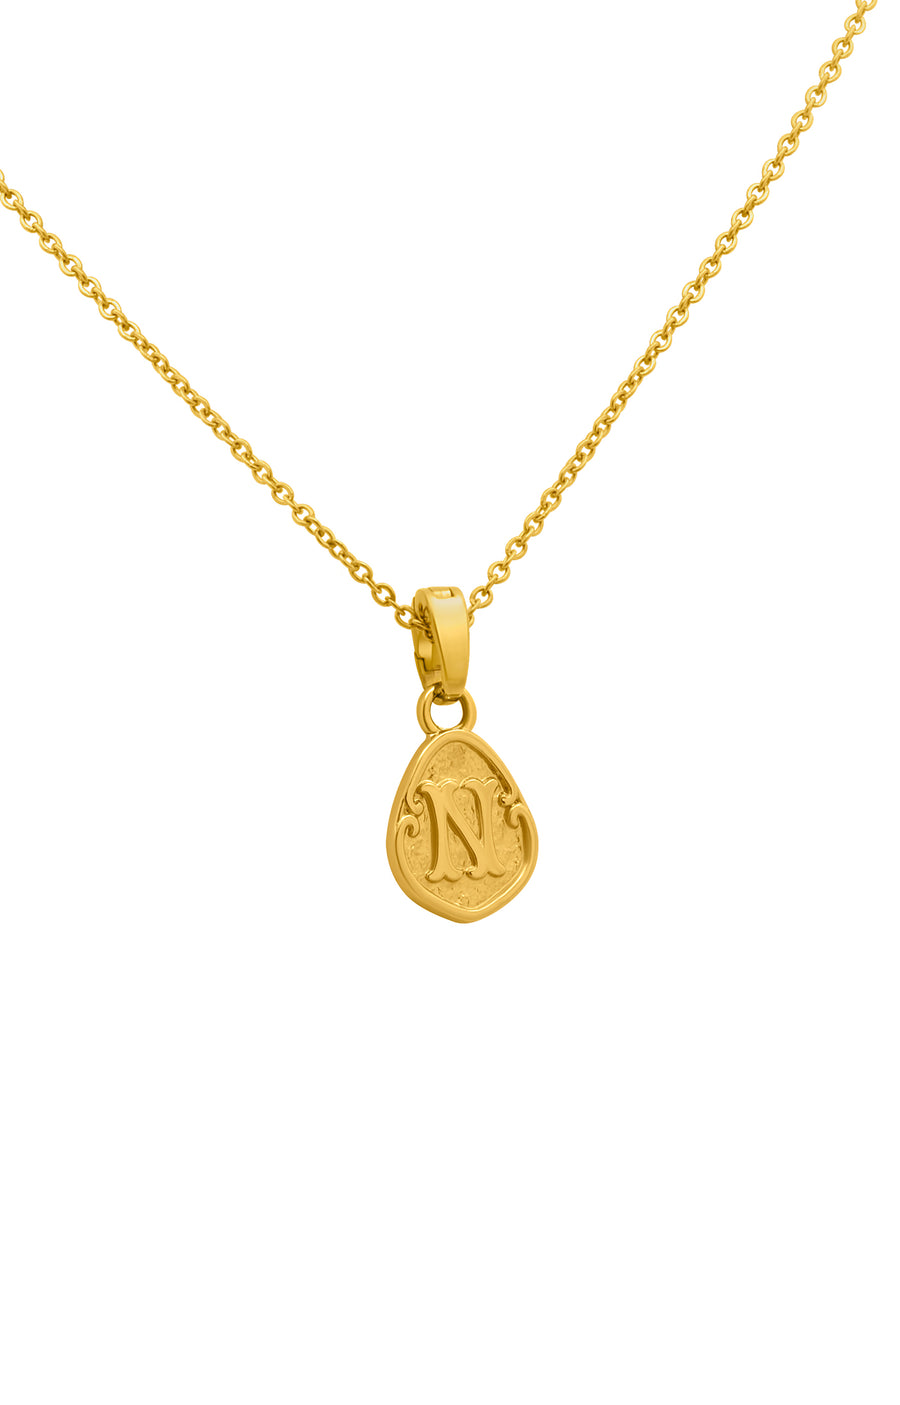 "N" Tberfil Letter Pendant with Petite Adjustable Chain Necklace